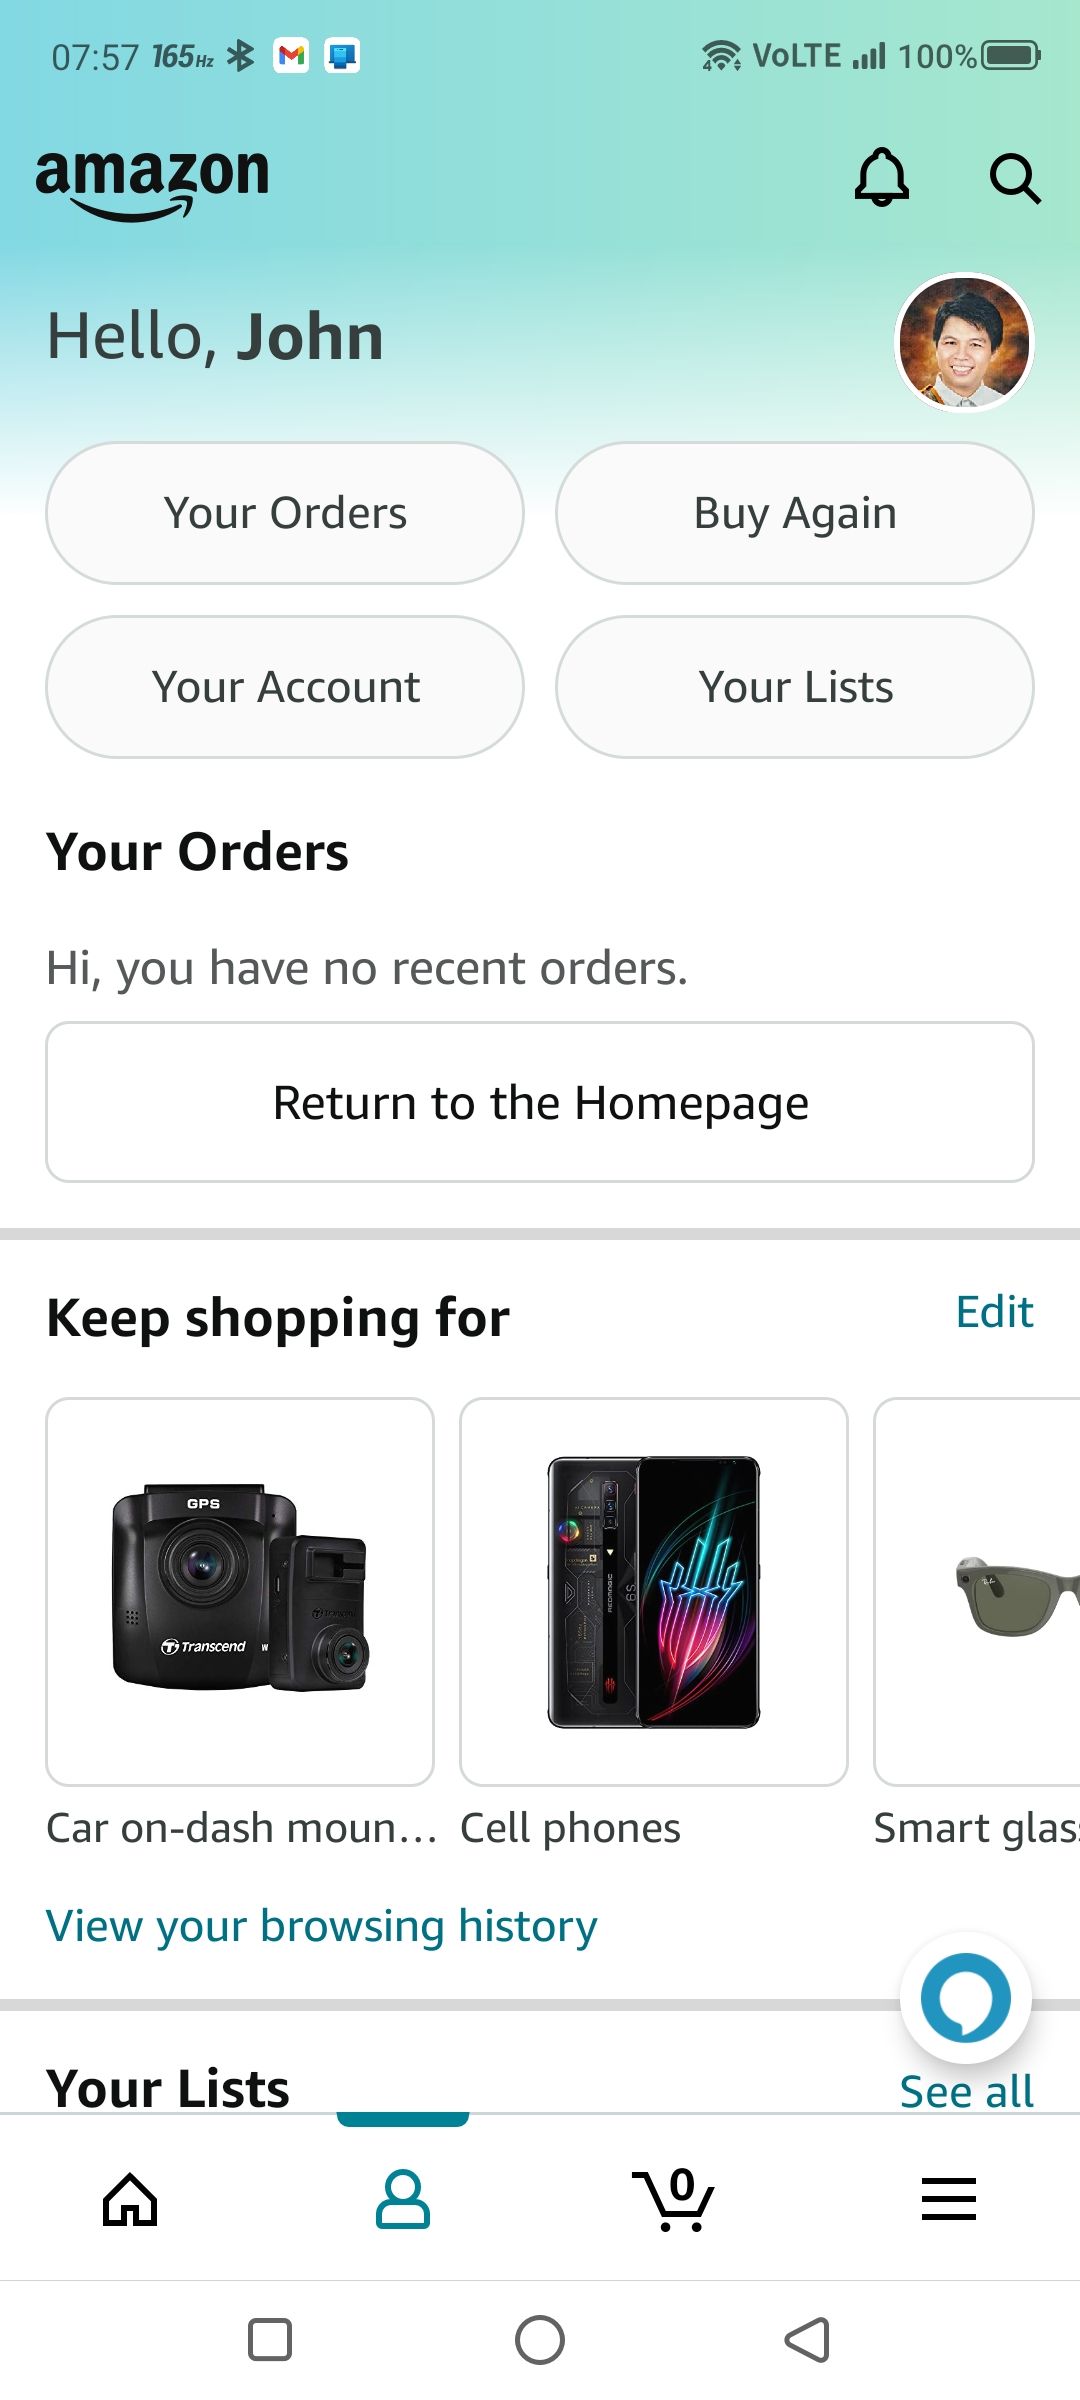 Amazon settings page on the app